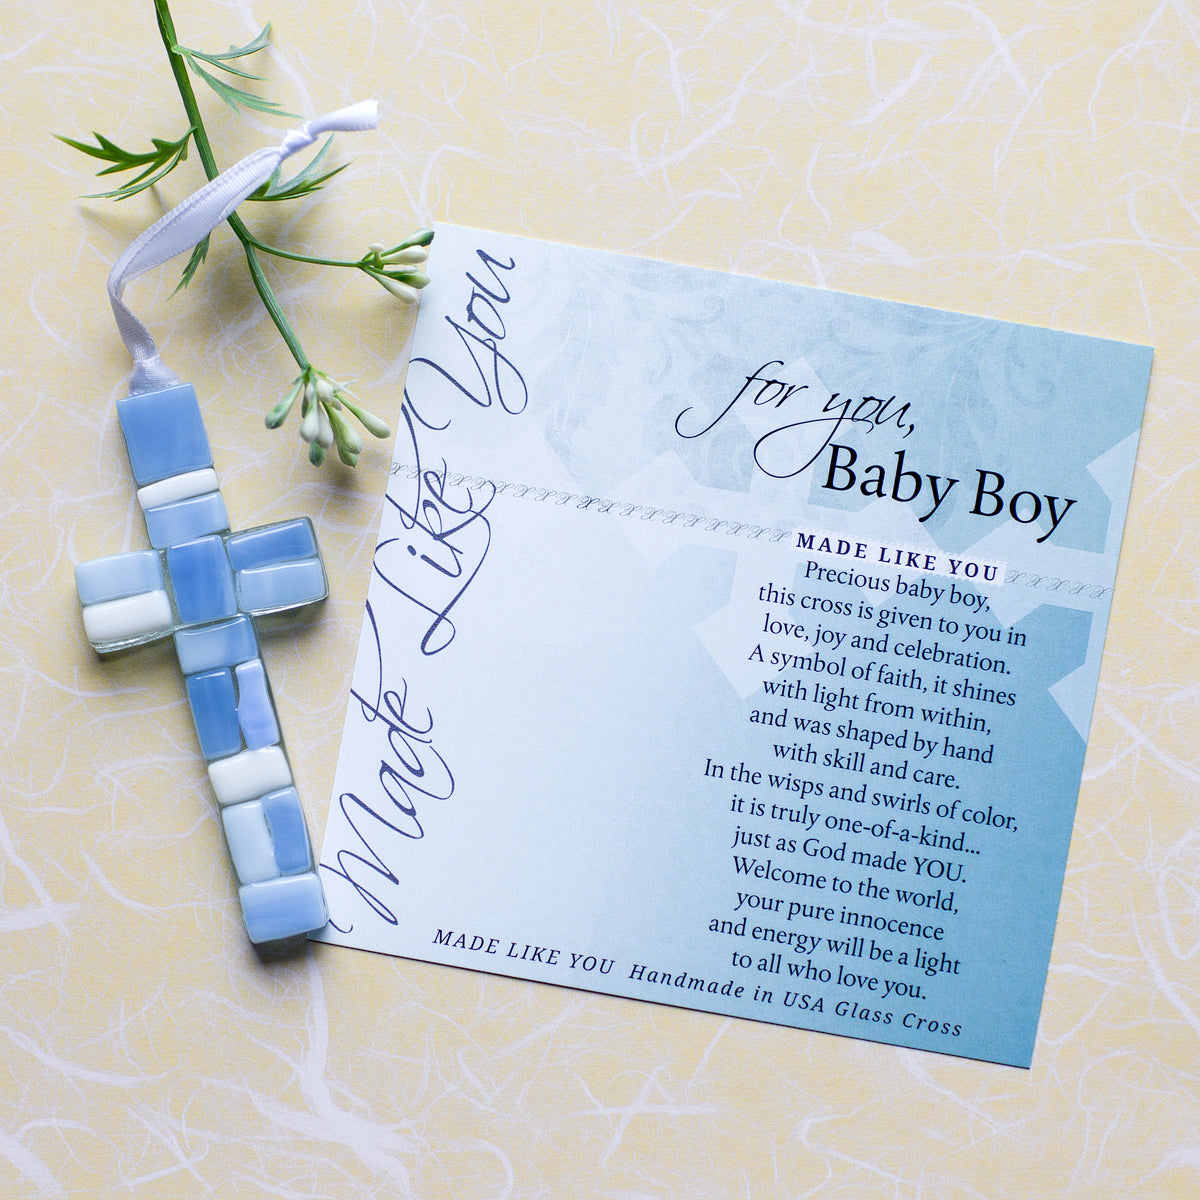 Blue Mosaic cross with shades of blue and white lying next to the For You, Baby Boy sentiment artwork.